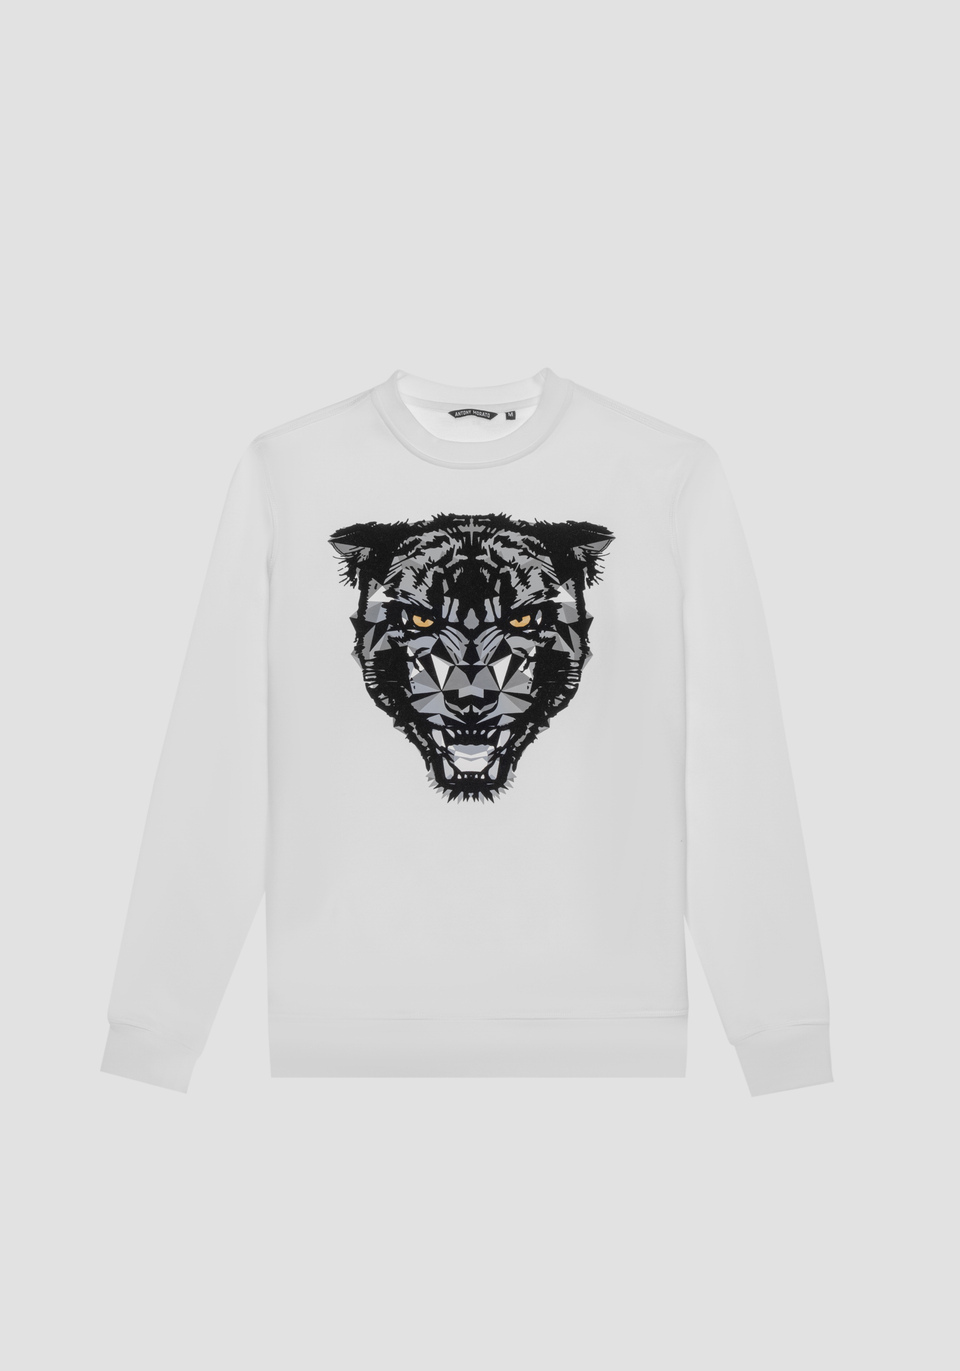 REGULAR FIT SWEATSHIRT IN COTTON BLEND FABRIC WITH PANTHER PRINT - Antony Morato Online Shop